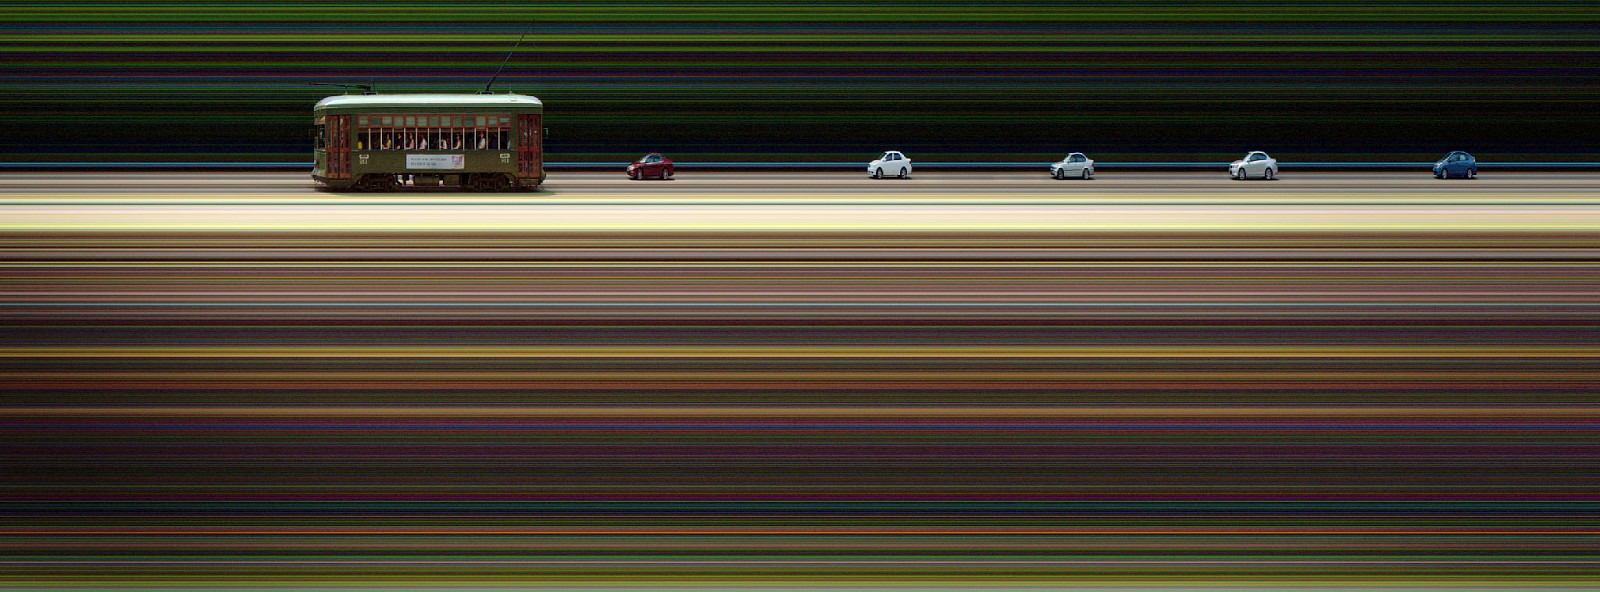 Jay Mark Johnson, UPTOWN STREETCAR, 2010 New Orleans LA
archival pigment on paper, mounted on aluminum, 40 x 132 in. (101.6 x 335.3 cm)